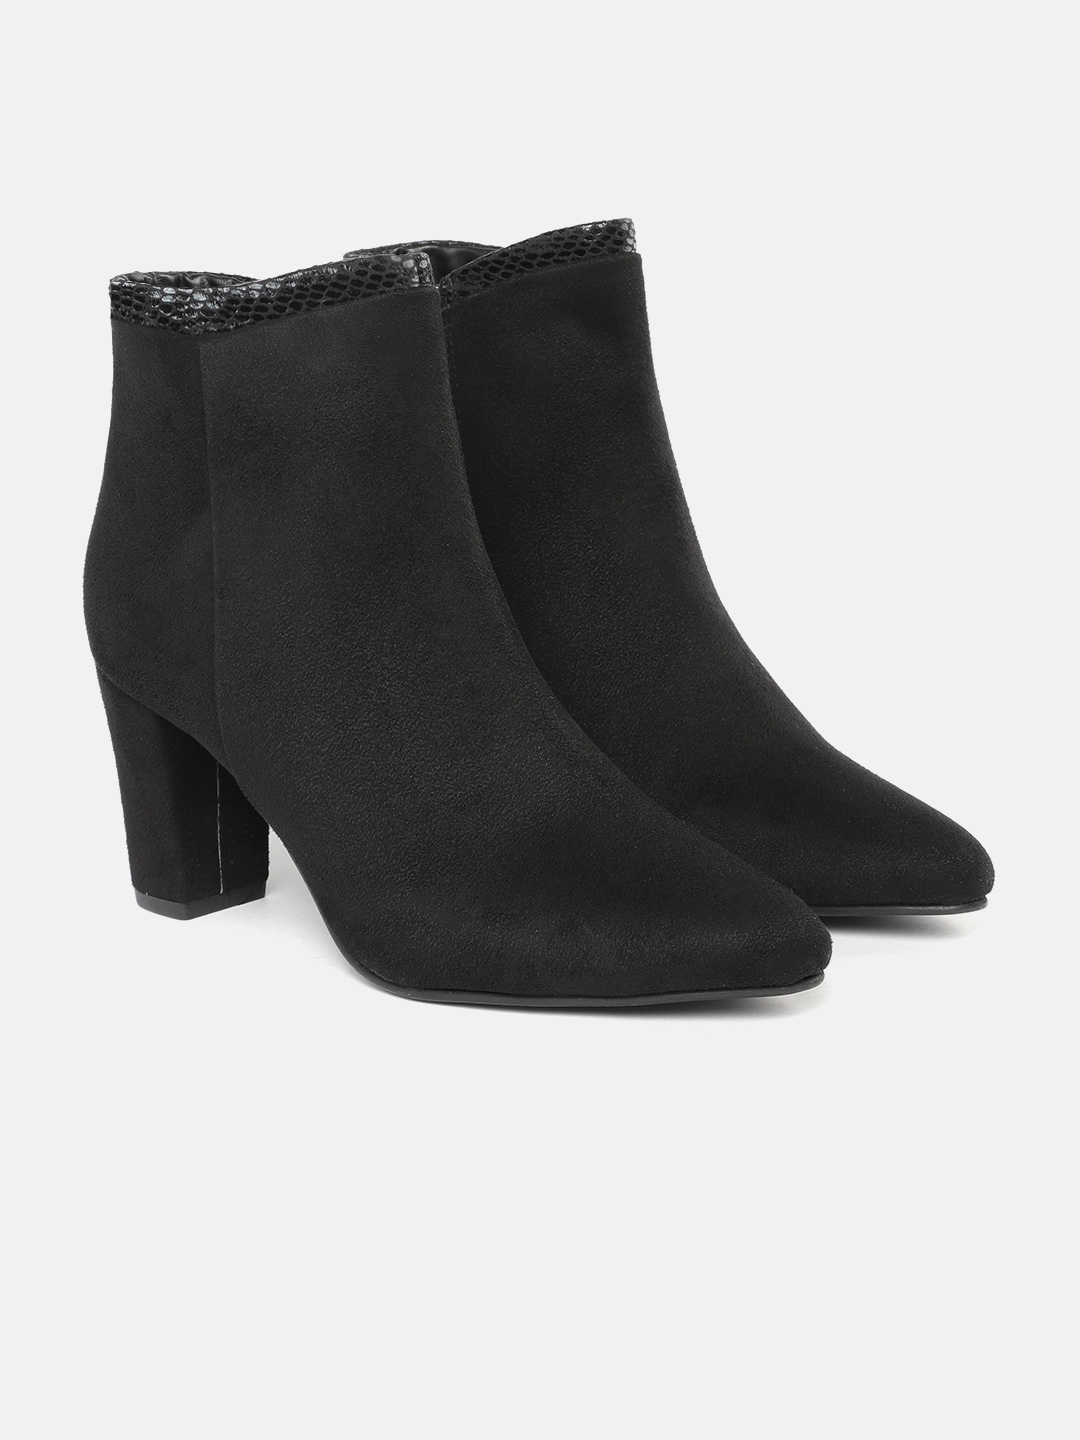 DressBerry Women Black Solid Mid-Top Heeled Boots Price in India